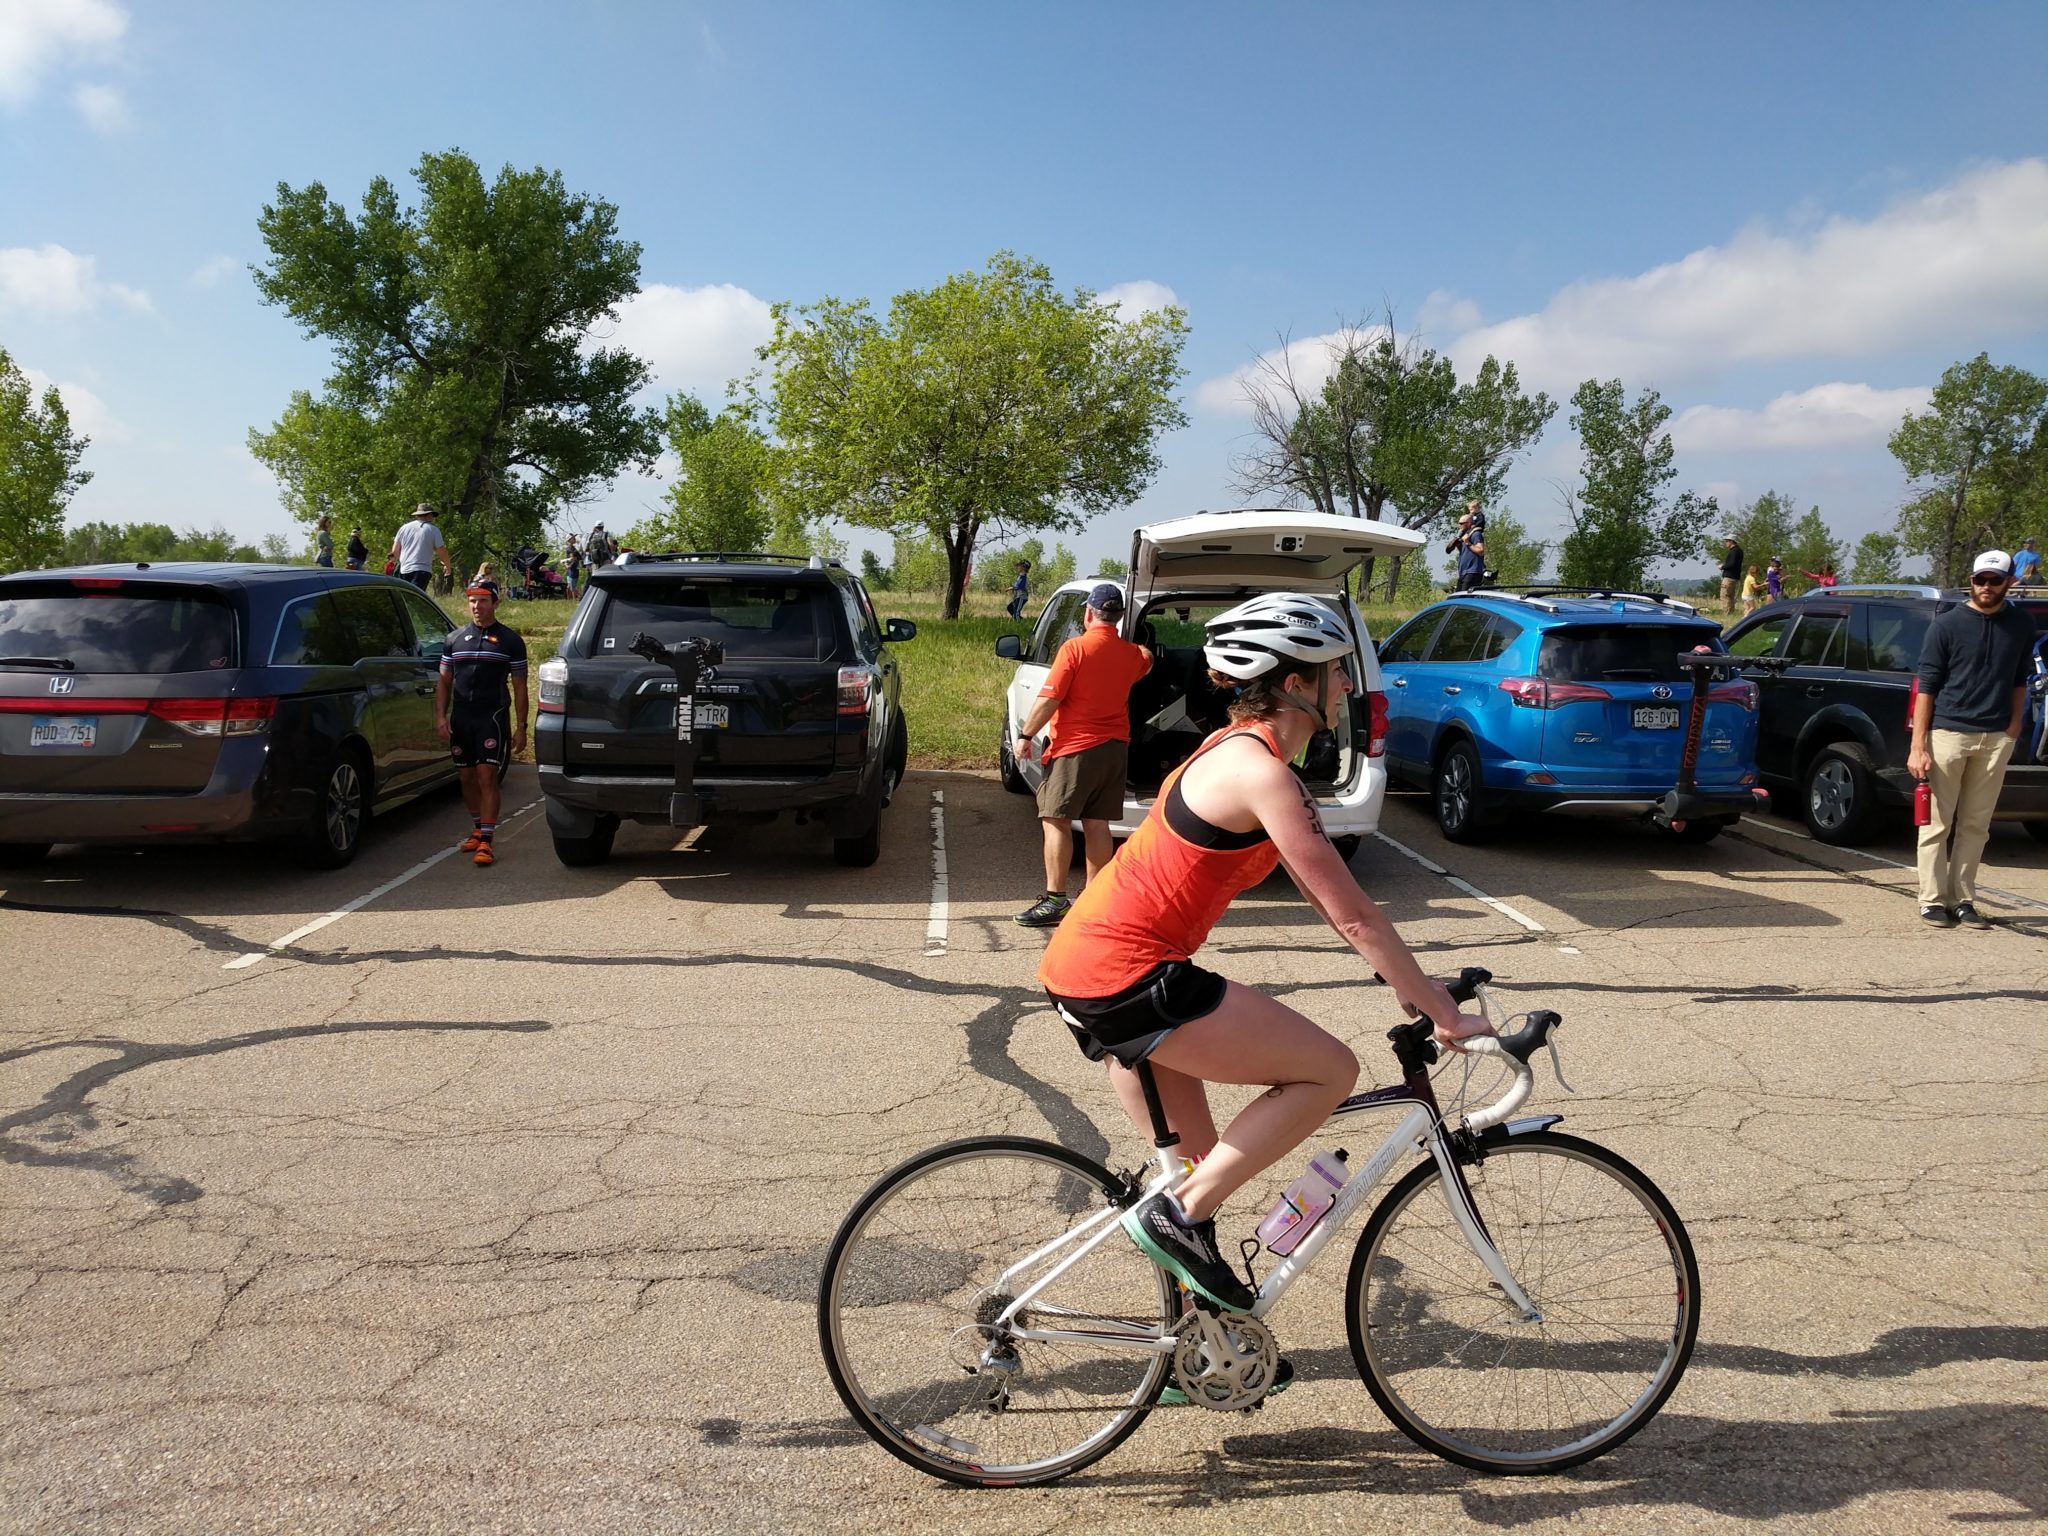 A person riding a road bike in a parking lot.